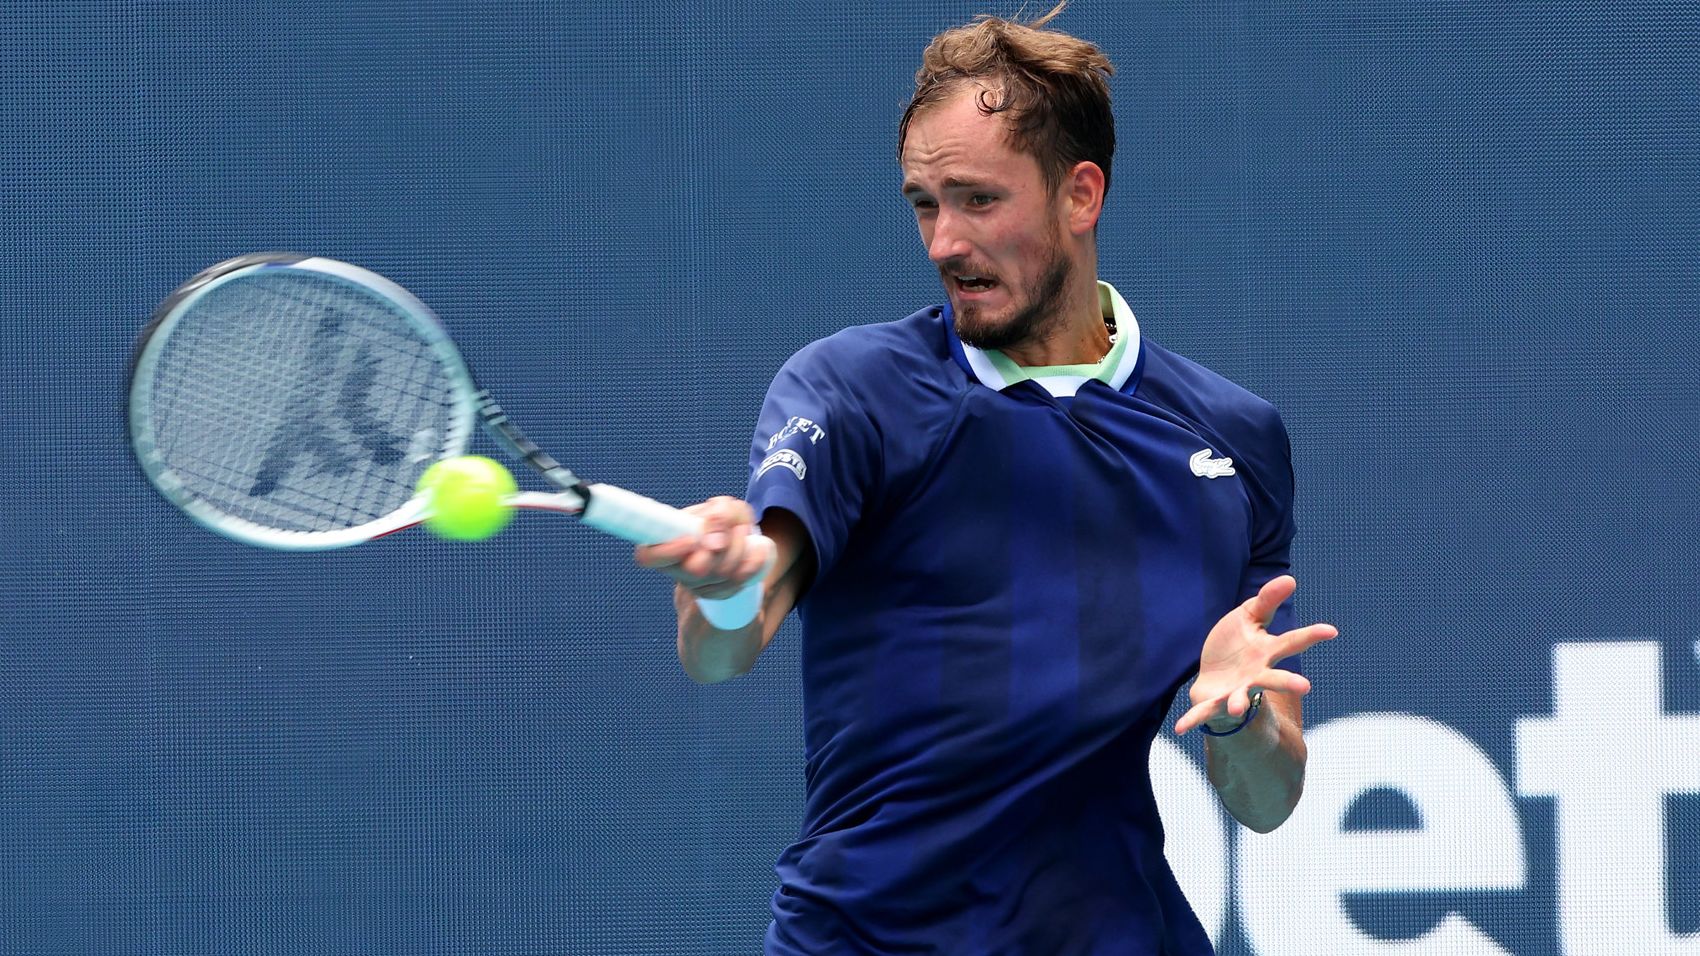 The current US Open champion, Daniil Medvedev, is unable to compete at WImbledon this year.